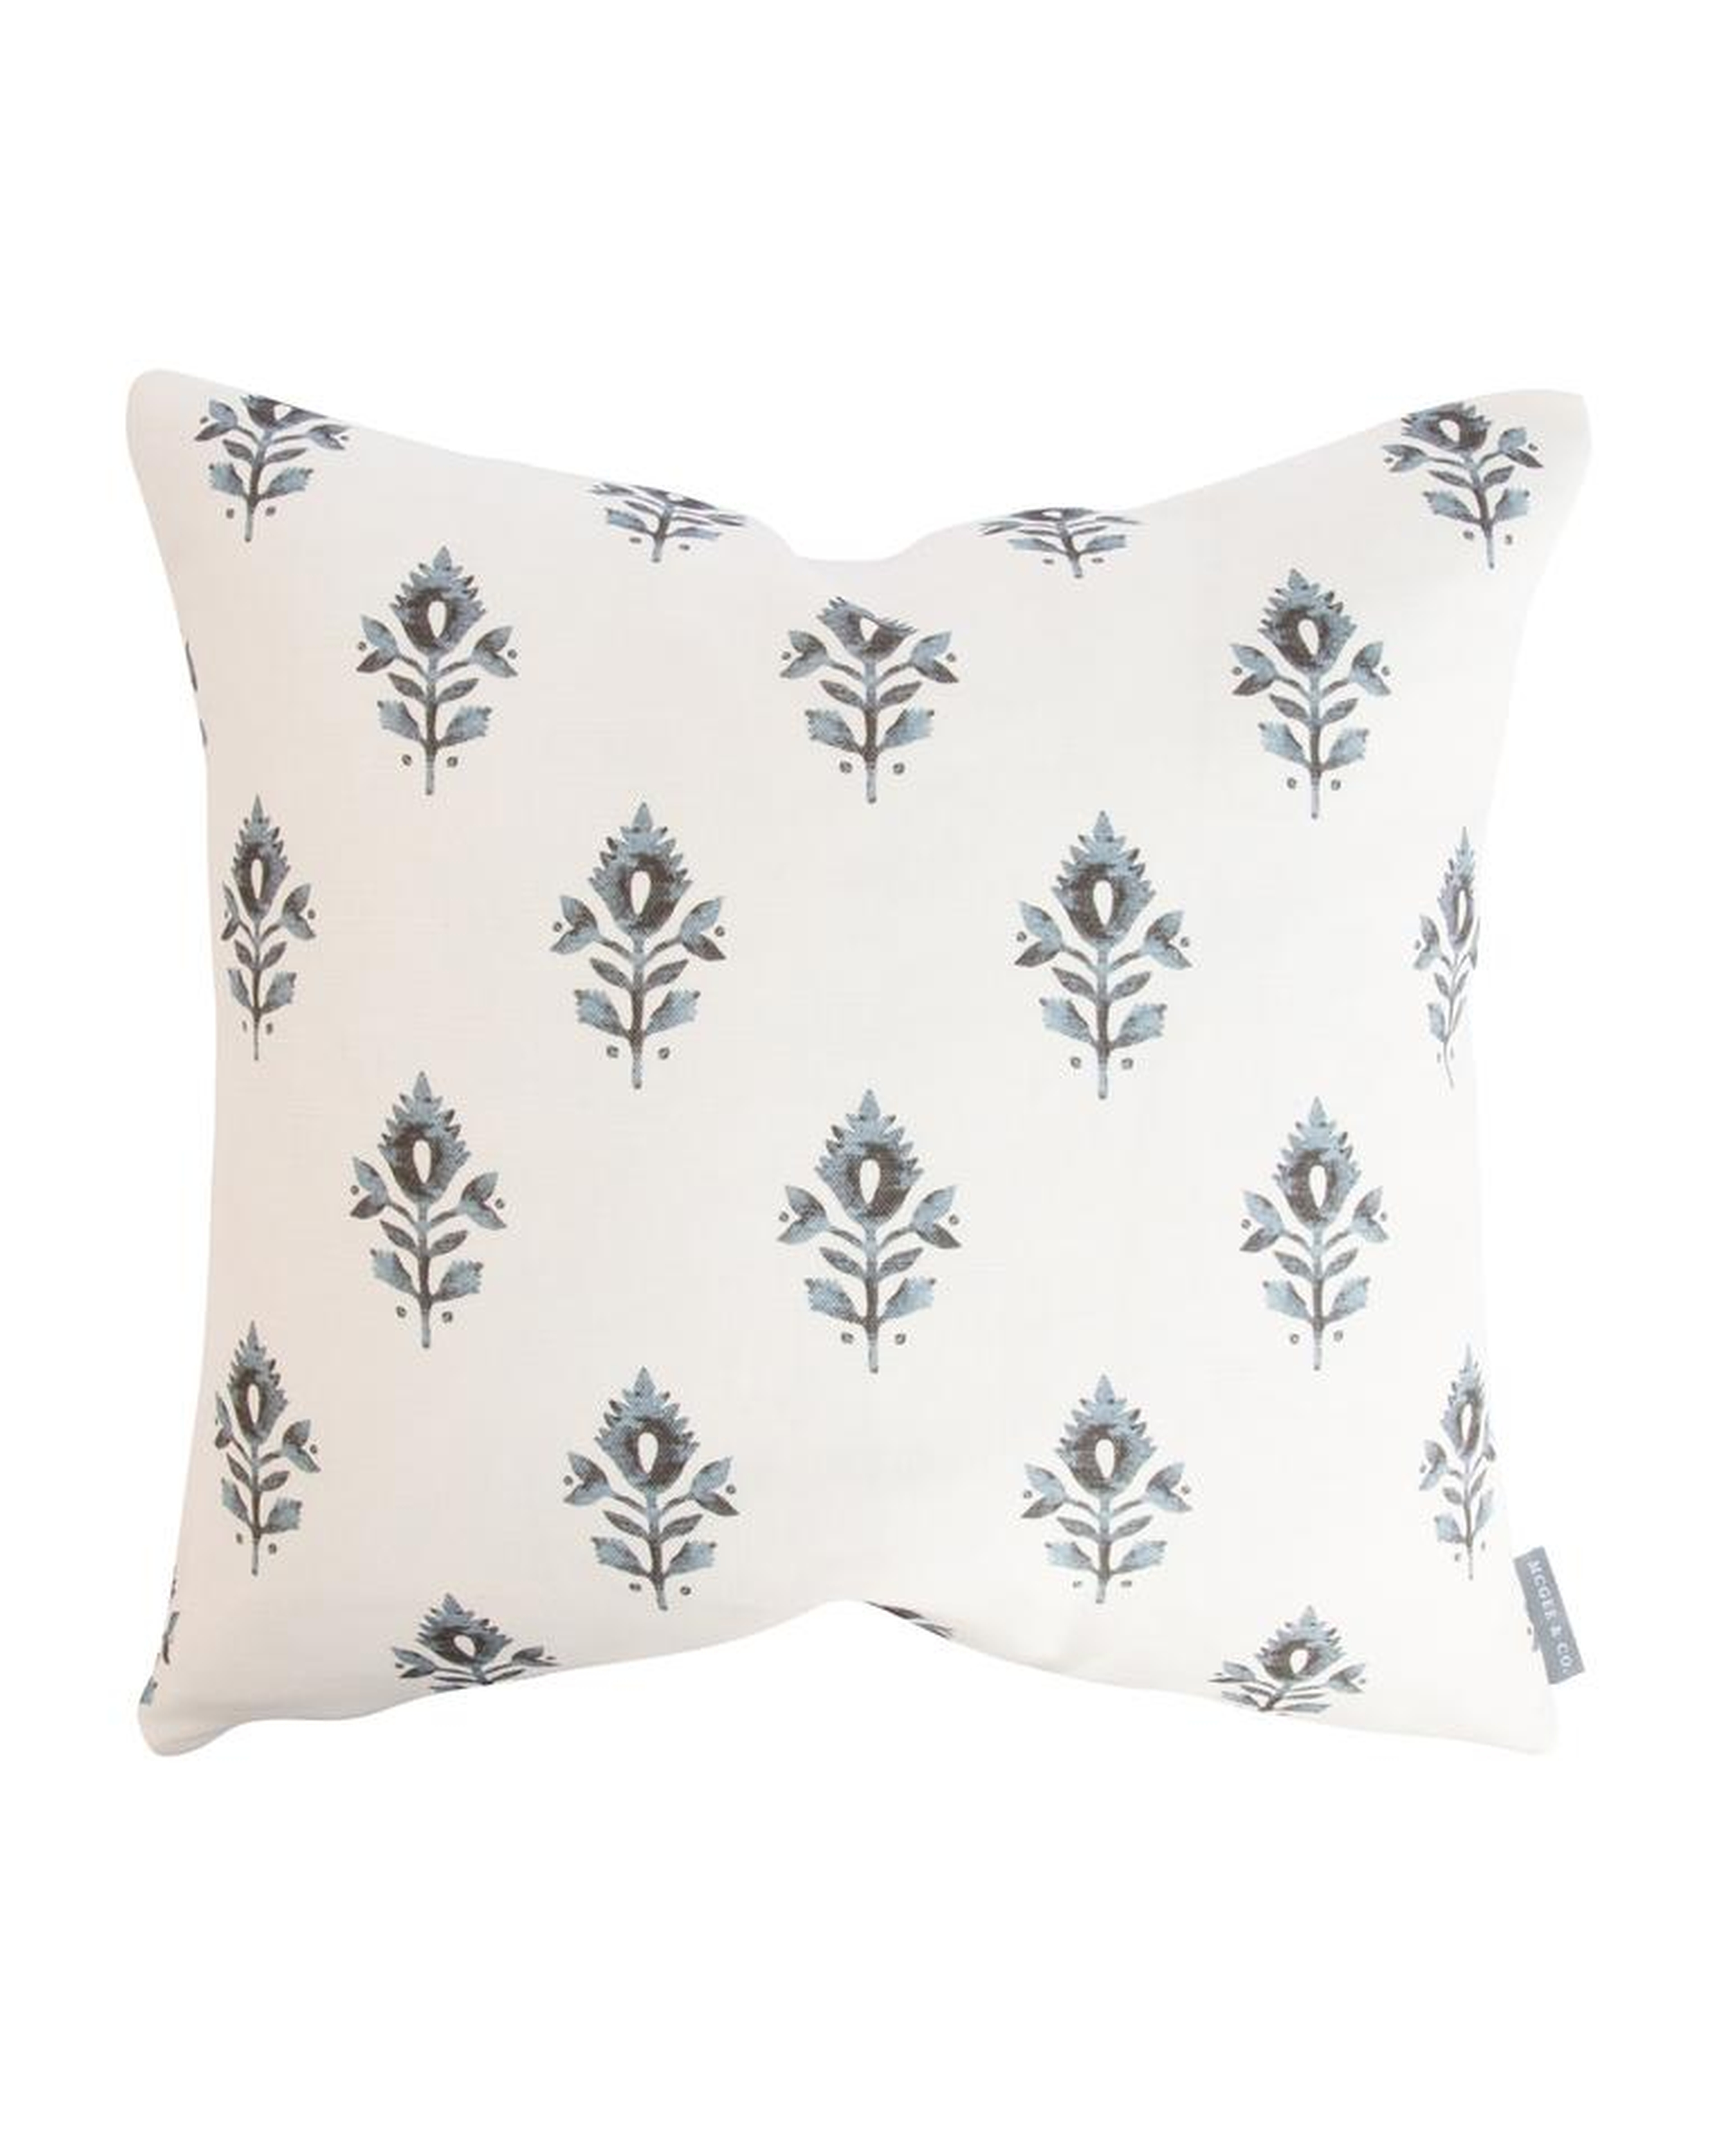 ADDISON BLOCK PRINT PILLOW WITHOUT INSERT, 22" x 22" - McGee & Co.